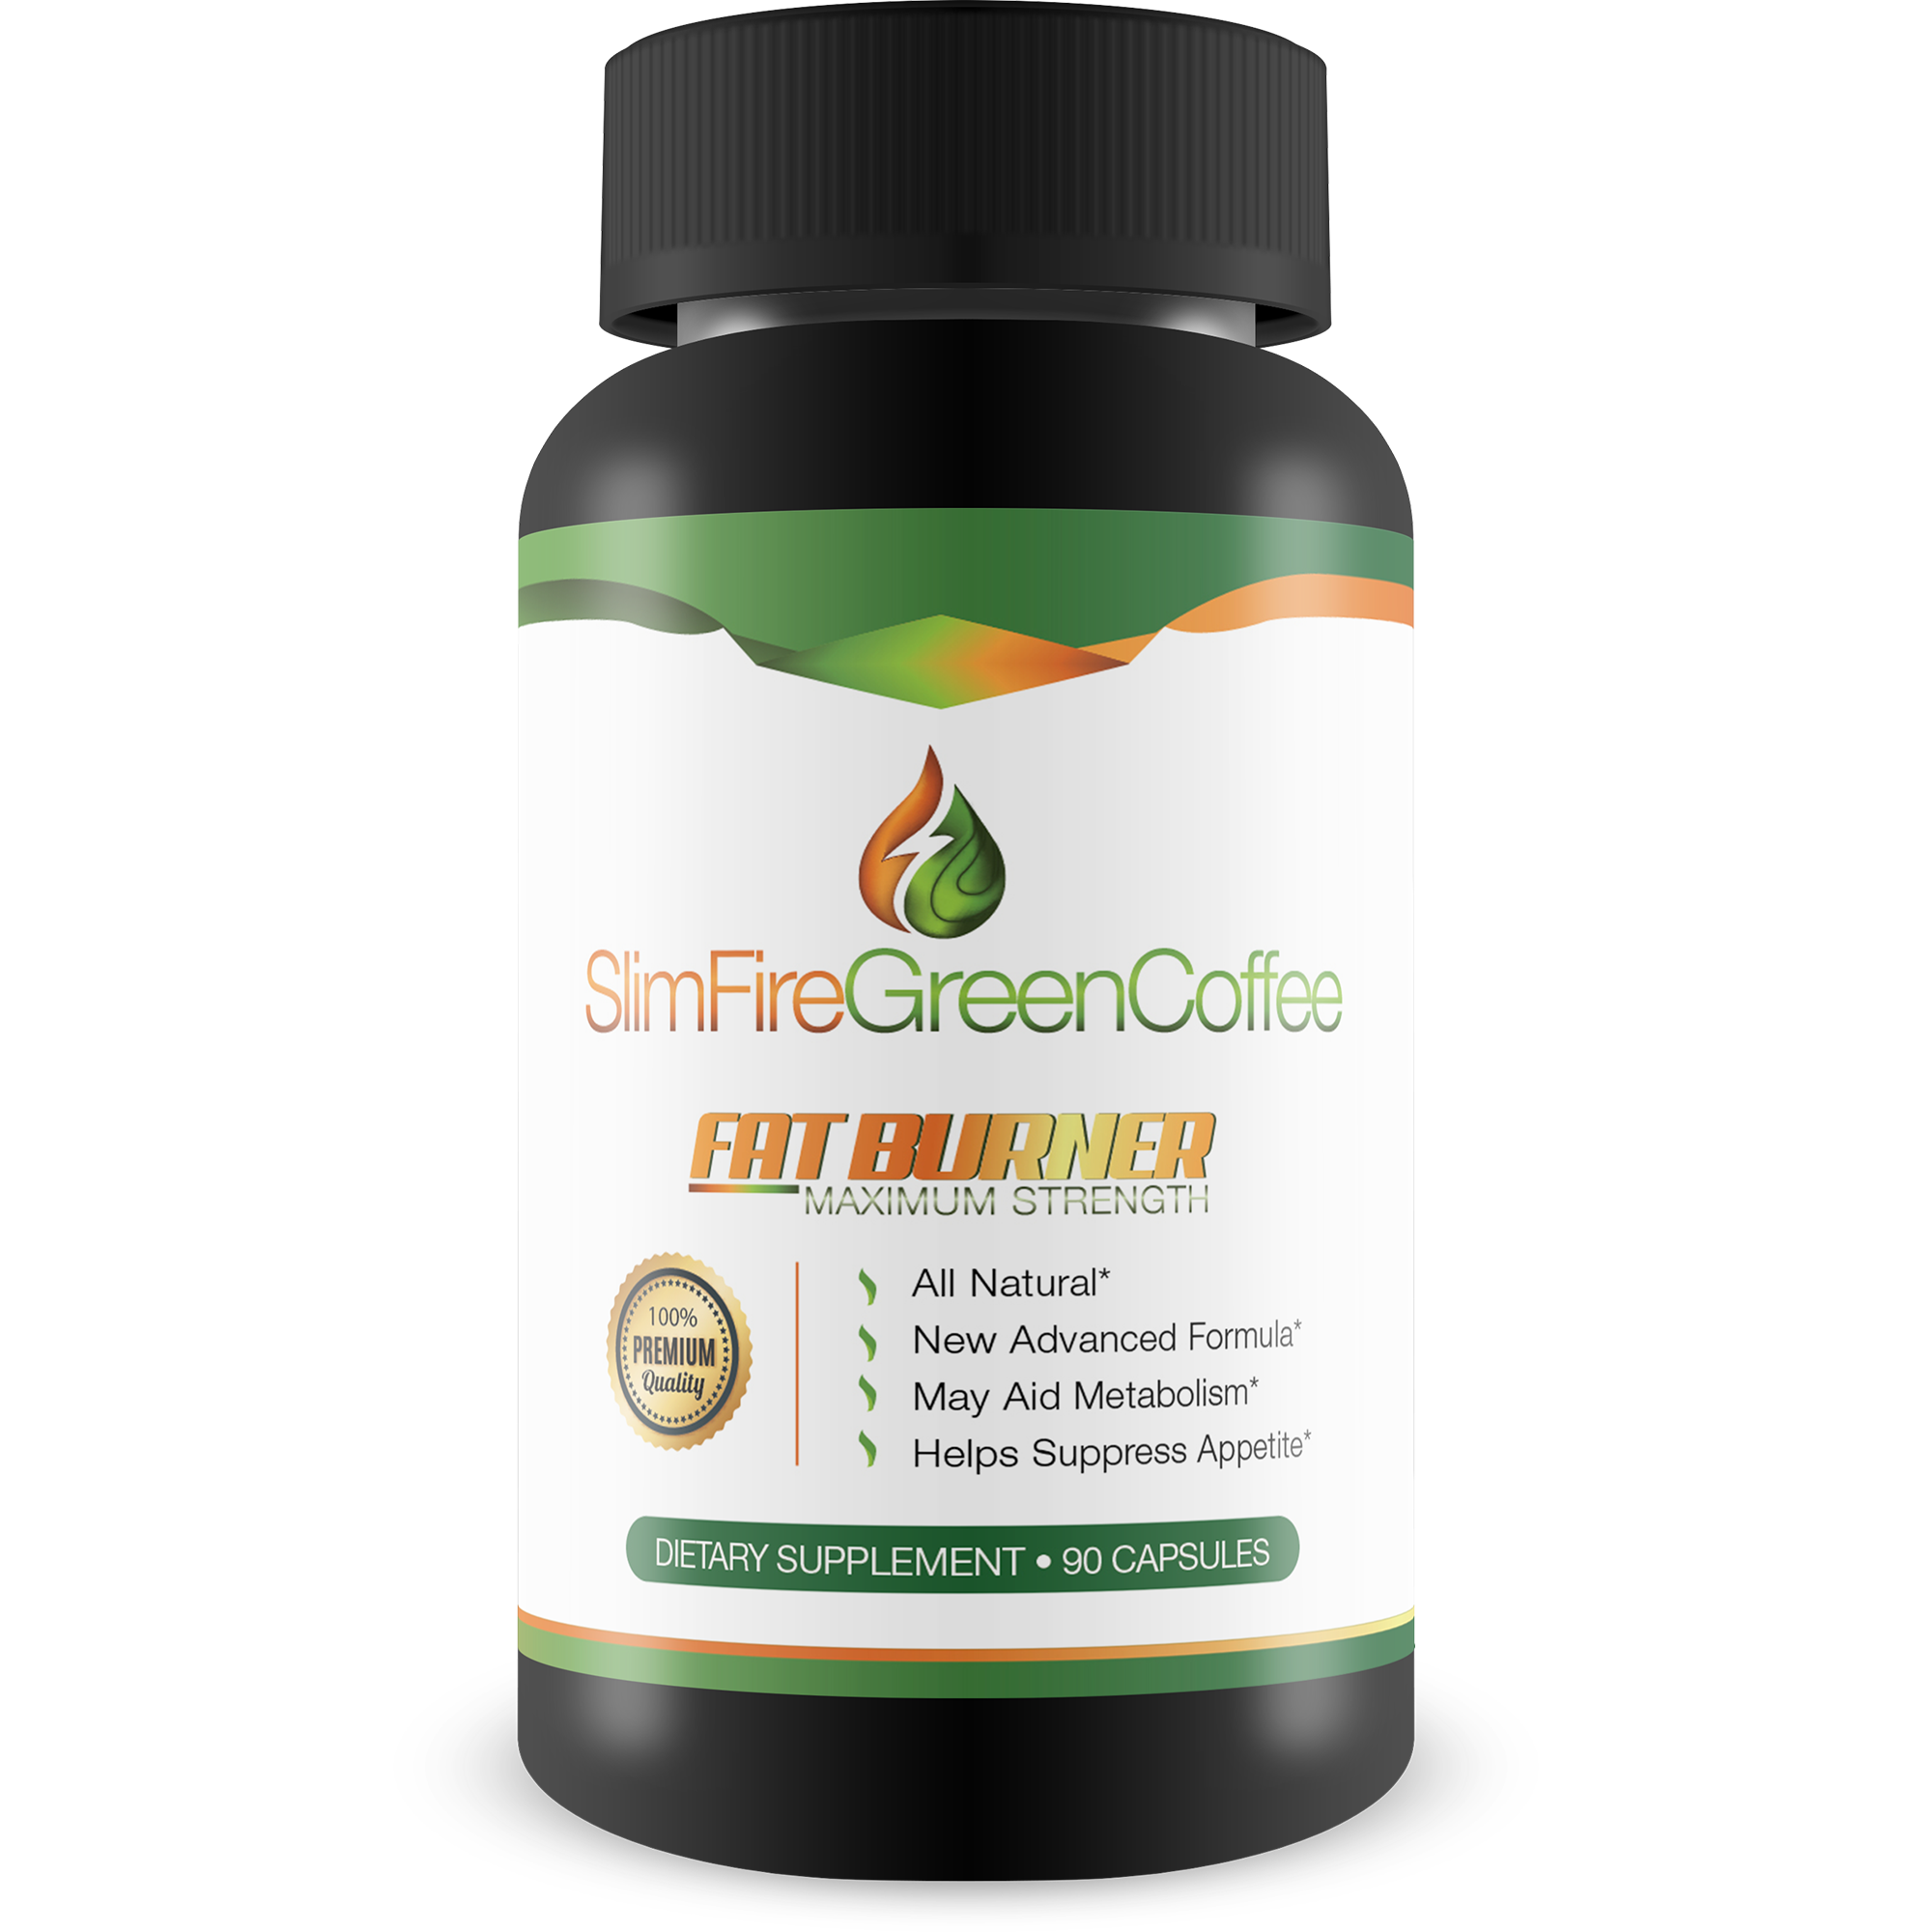 Slim Fire Green Coffee- Green Coffee- Ultra Premium Weight Management Formula-Natural And Potent Weight Loss Pills For Men And Women  Burn Belly Fat  Metabolism Booster  Powerful Antioxidant - image 1 of 6